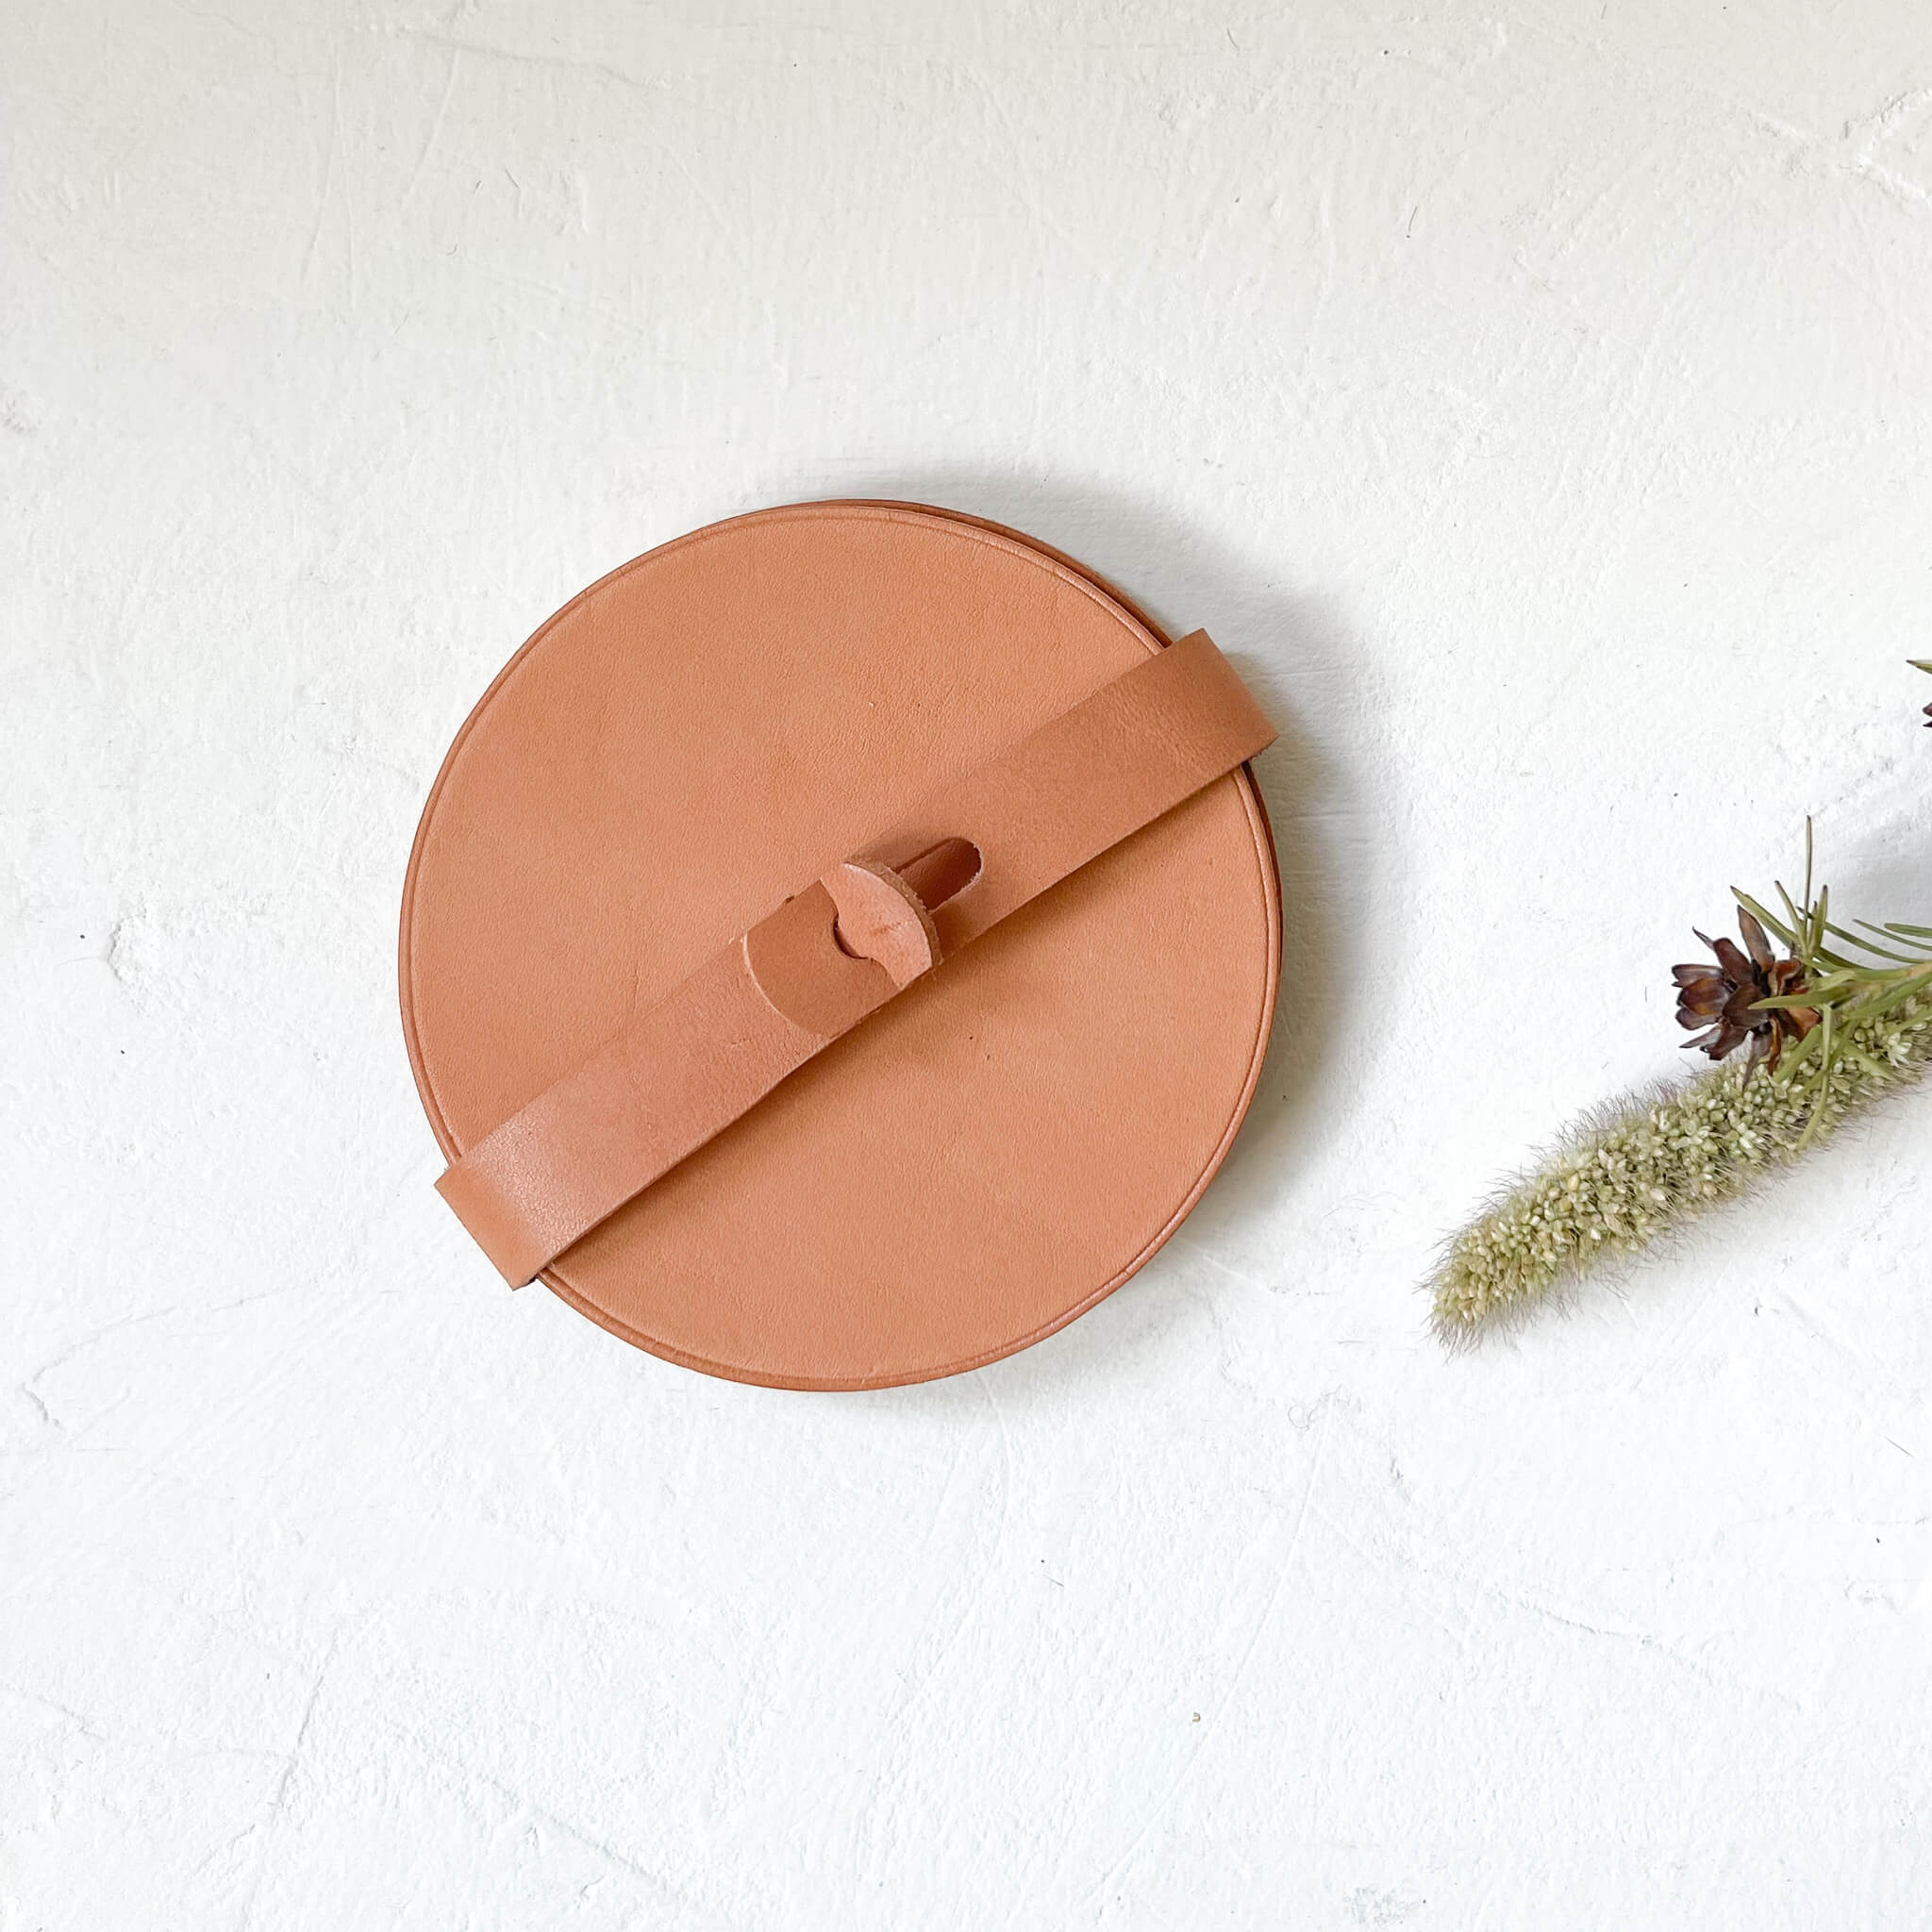 A set of Baja leather coasters in natural nude color shown with a storage strap.